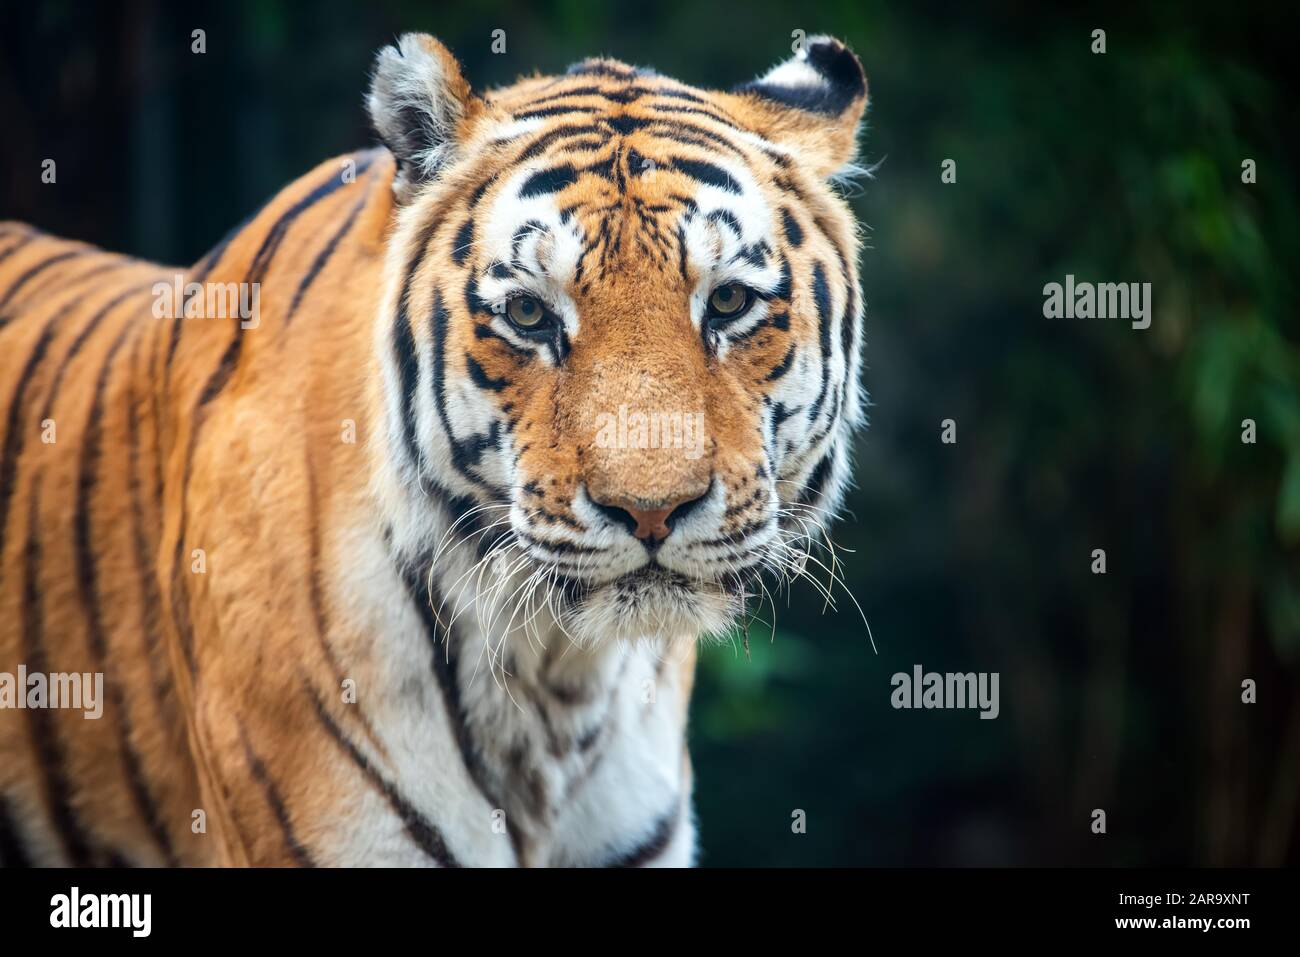 Close up tiger standing in grass looking at the camera Stock Photo